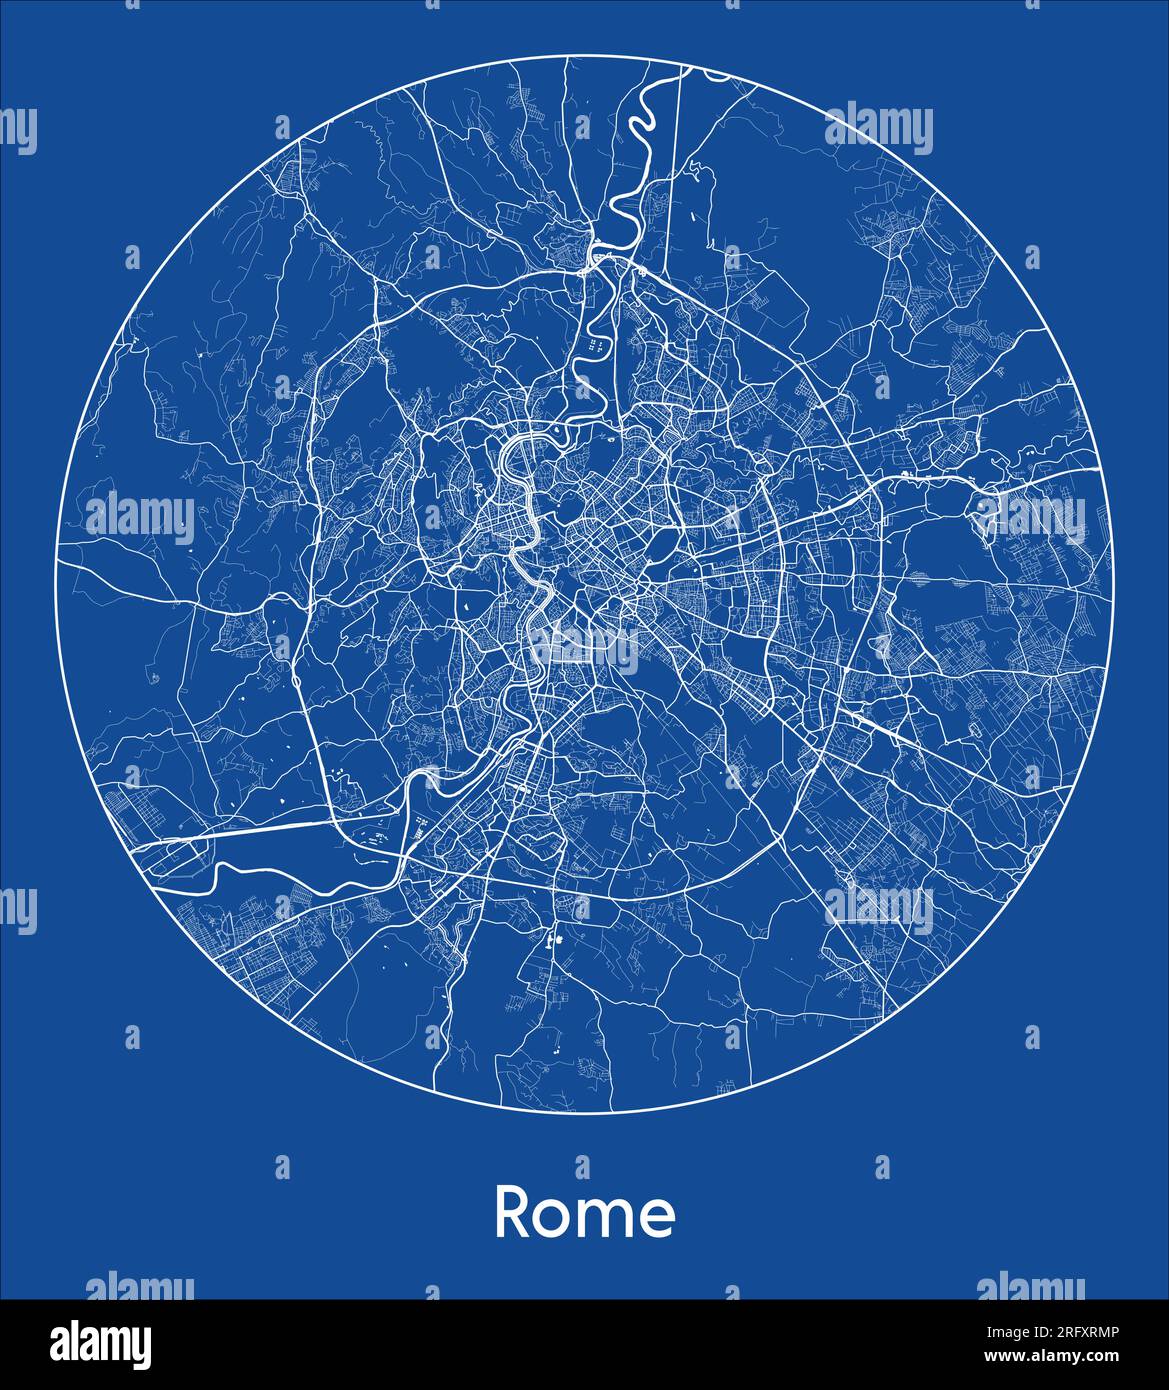 City Map Rome Italy Europe blue print round Circle vector illustration Stock Vector